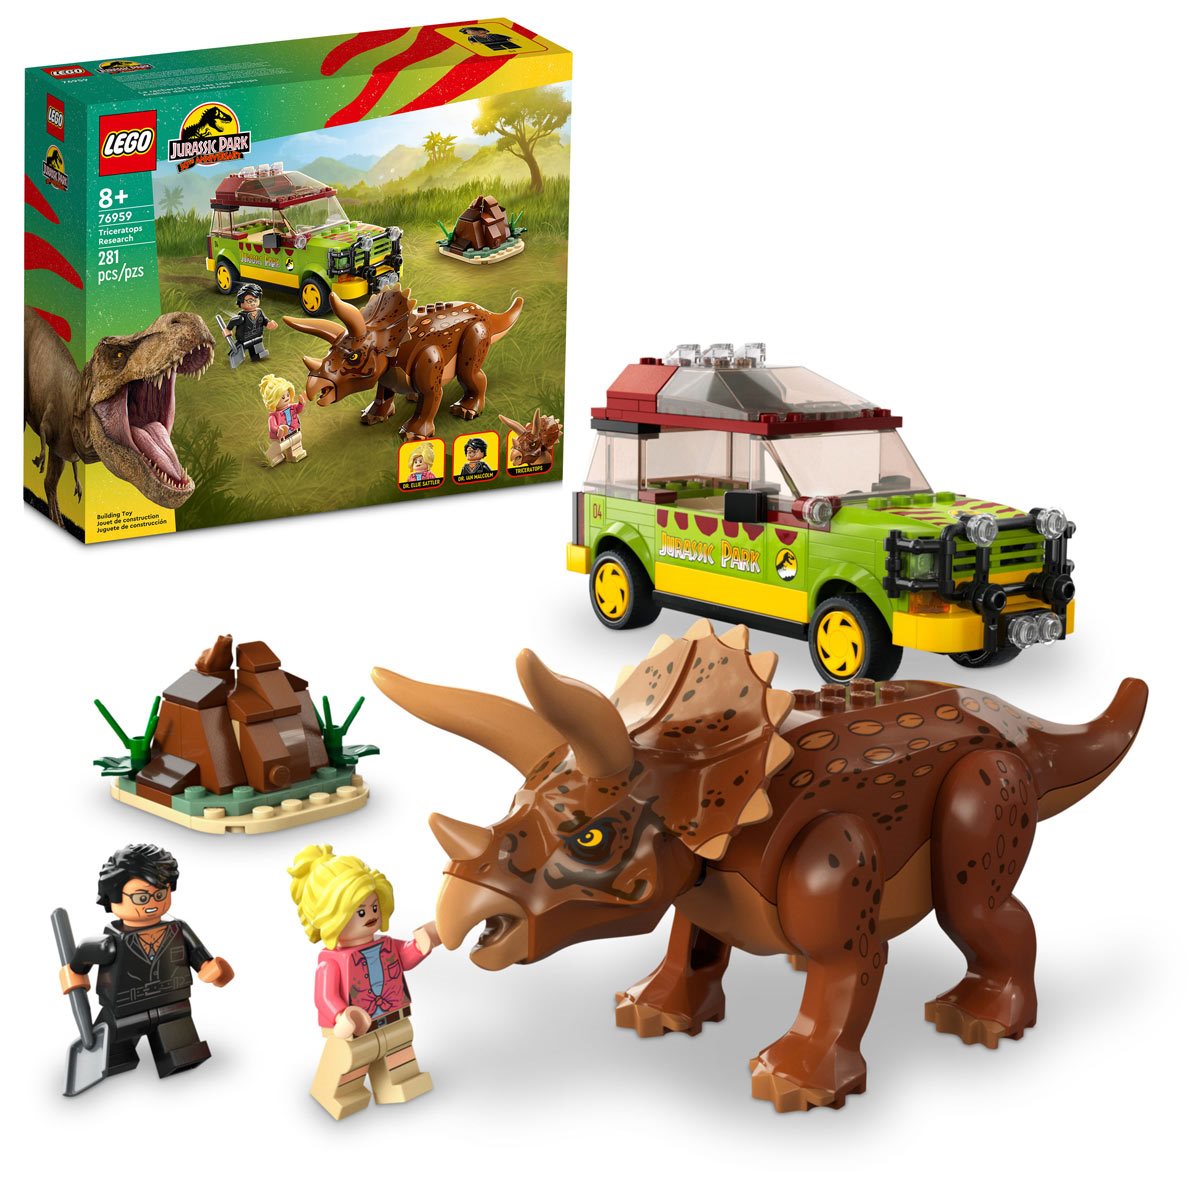 LEGO 76959 Jurassic Triceratops Research